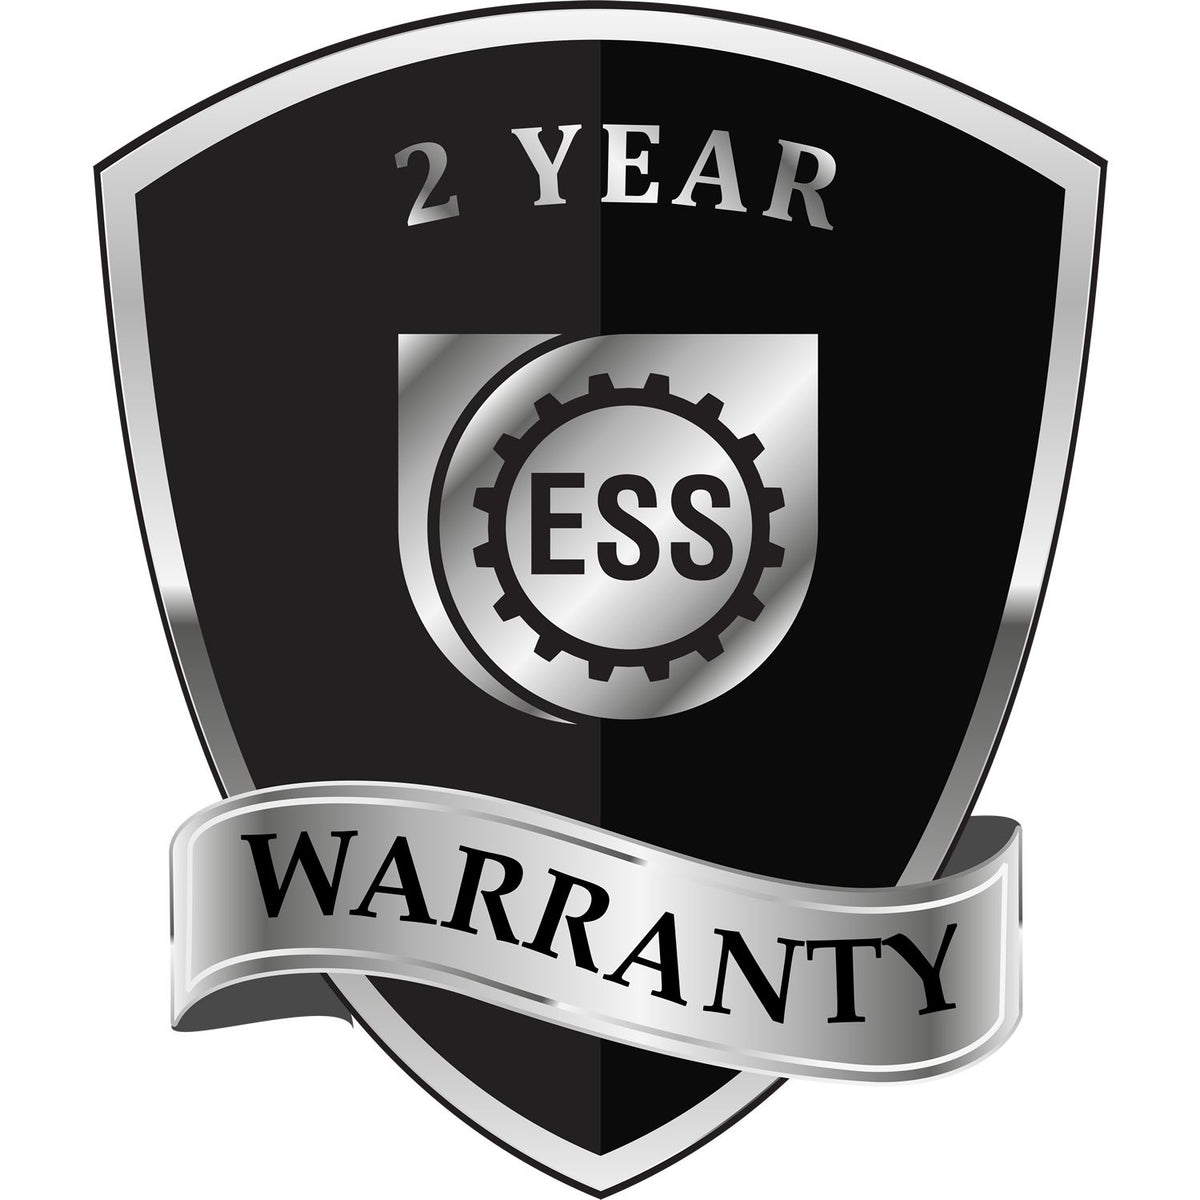 A badge or emblem showing a warranty icon for the Extended Long Reach Louisiana Architect Seal Embosser